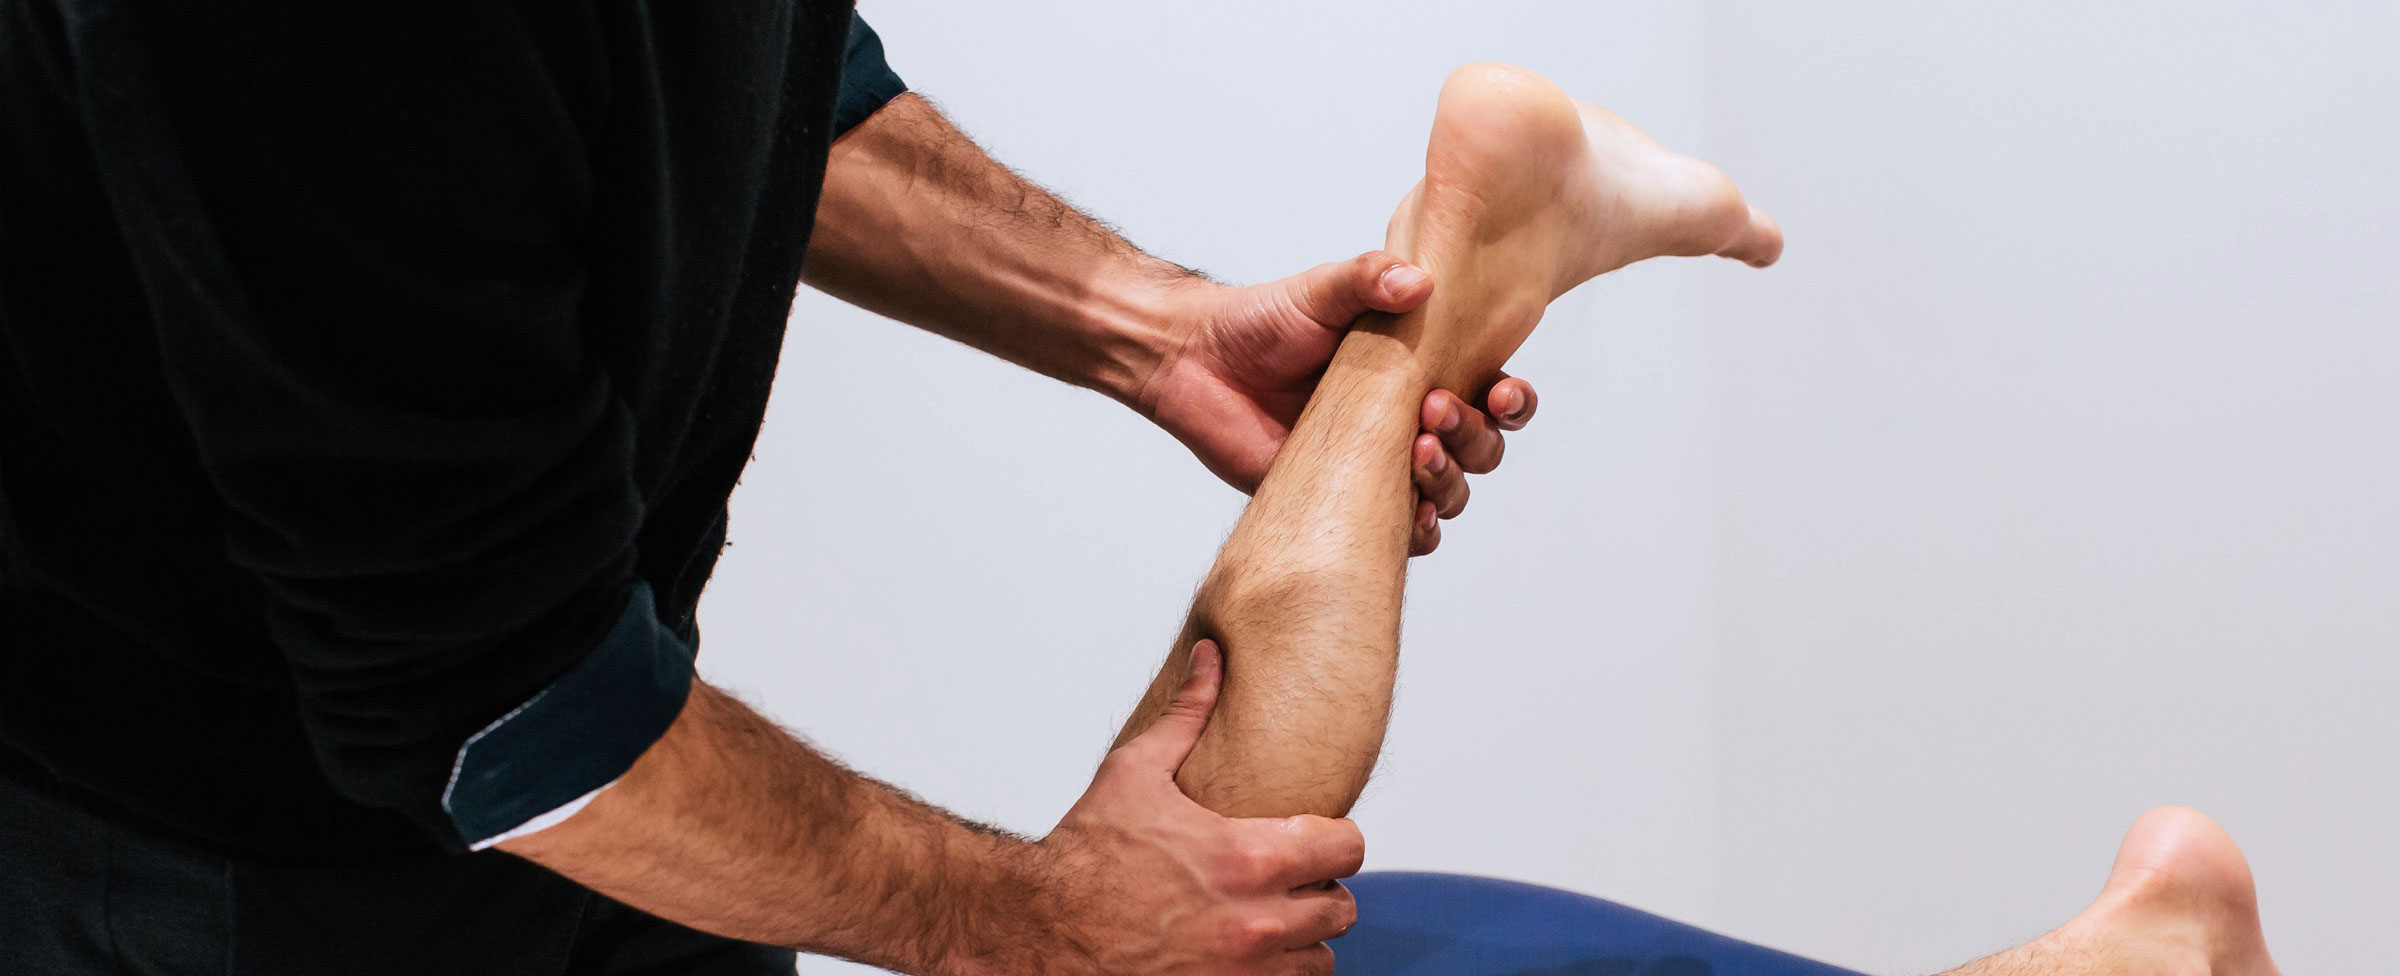 What is the ART soft tissue technique?